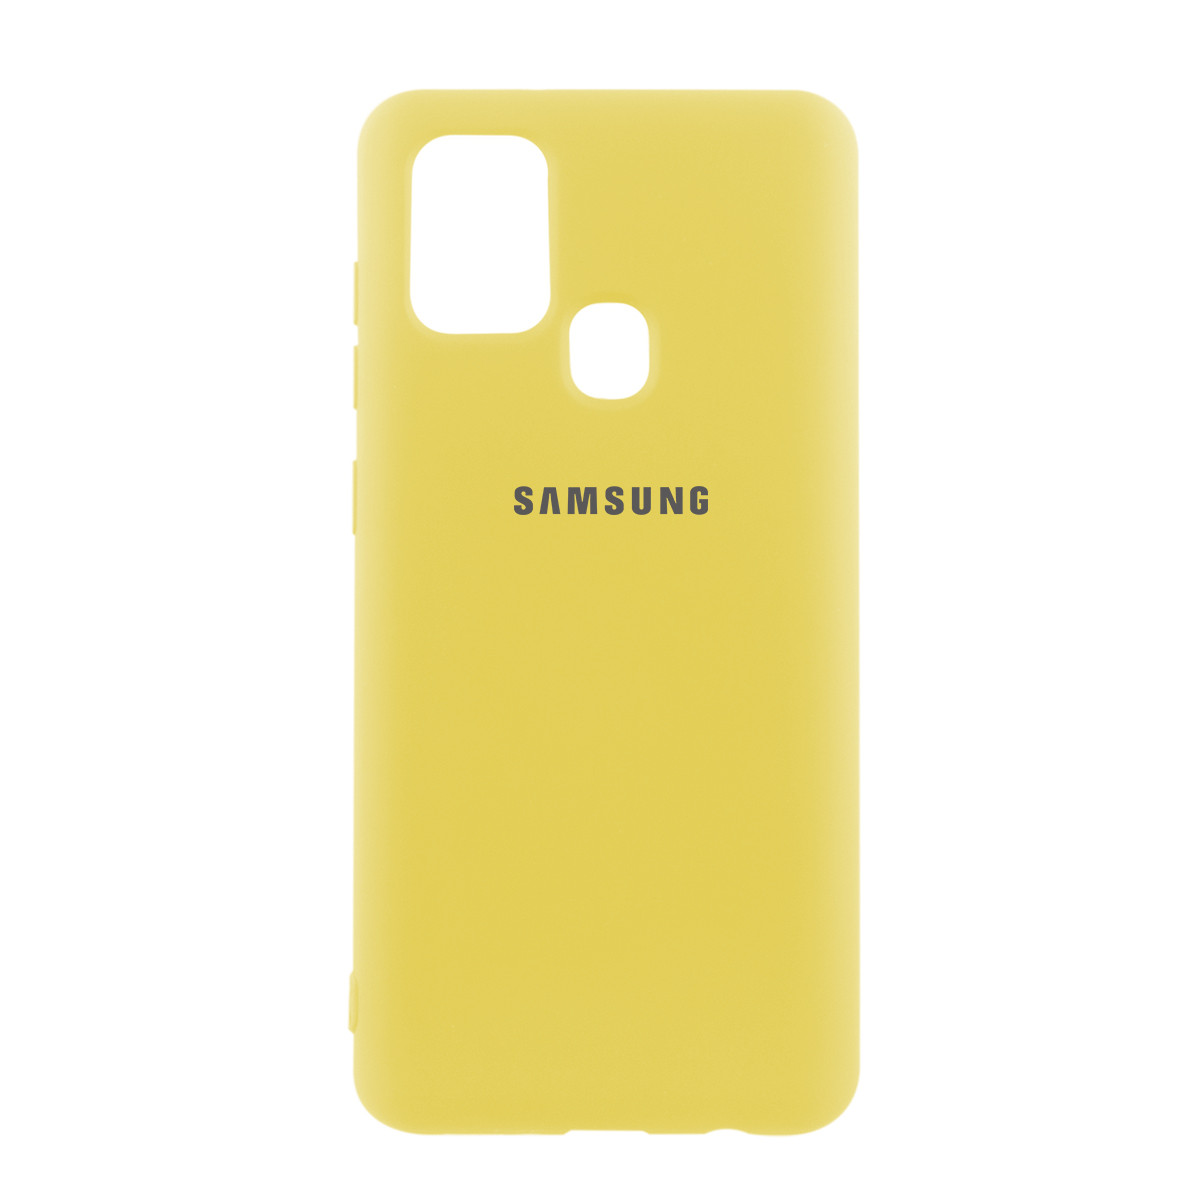 Чехол для Samsung Galaxy A21S back cover Silky and soft-touch Silicone Cover OEM, Yellow - фото 1 - id-p115022671